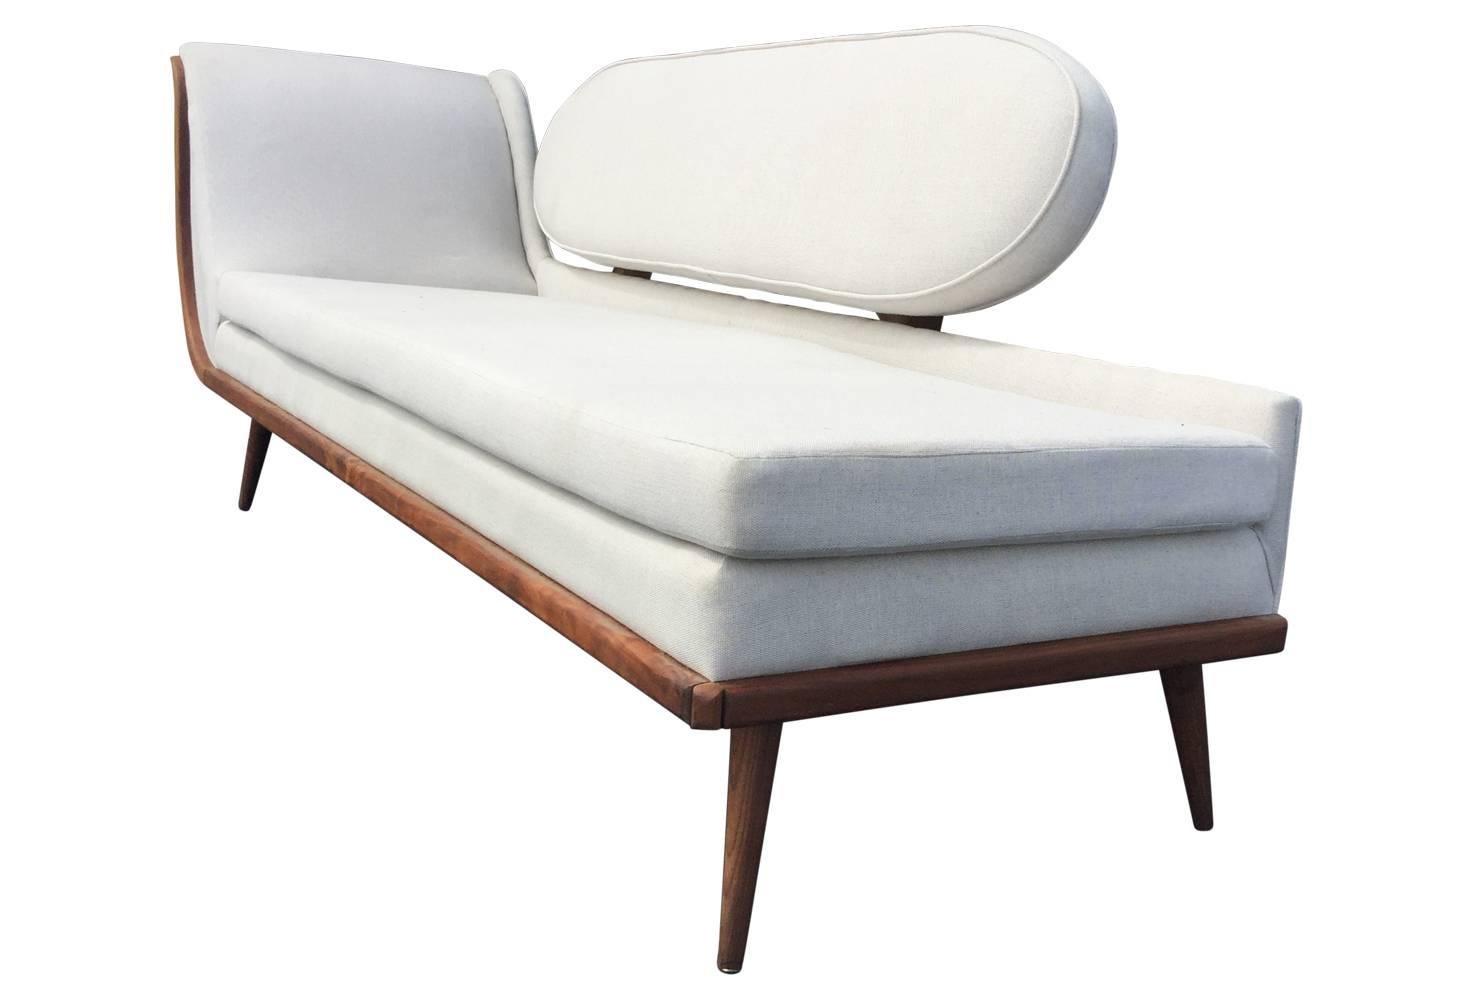 Manufactured in the 1950s for Cimon of Montreal, this rare sofa is a showstopper! Sturdy construction, a teak frame, and linen upholstery make this piece both beautiful and functional. Very light evidence of age and use.